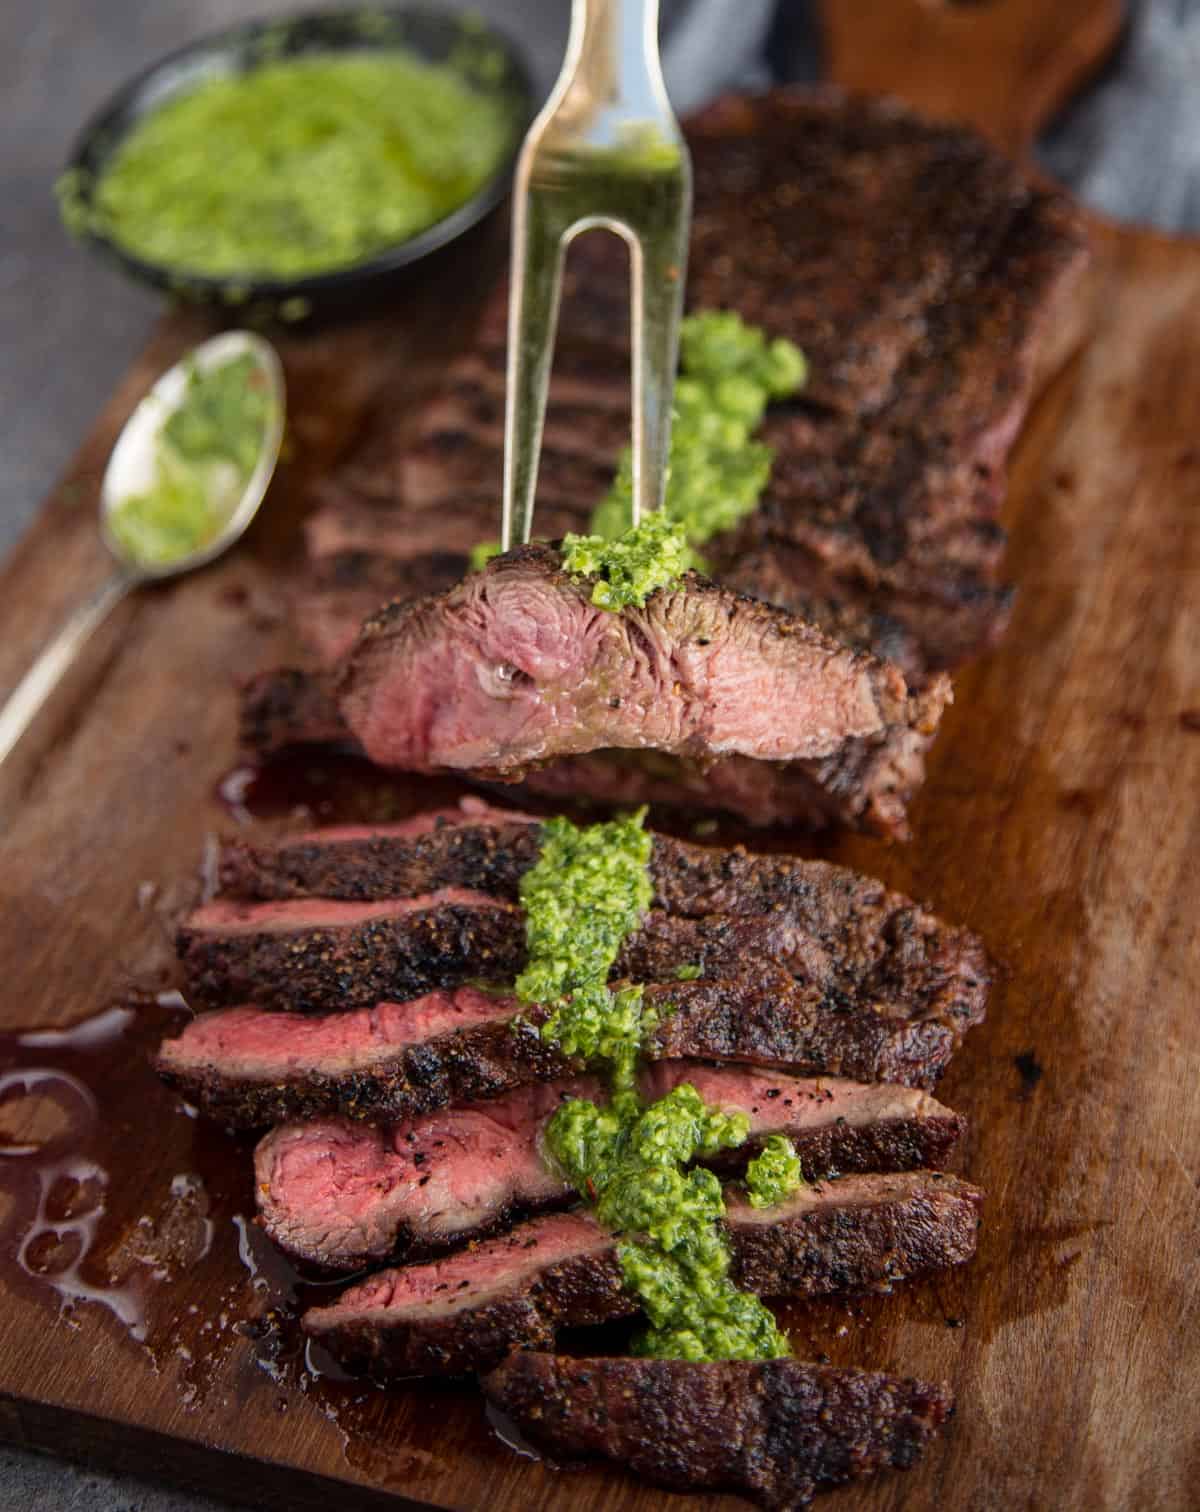 Sliced grilled flat iron steak with jalapeno chimichurri sauce over the top.